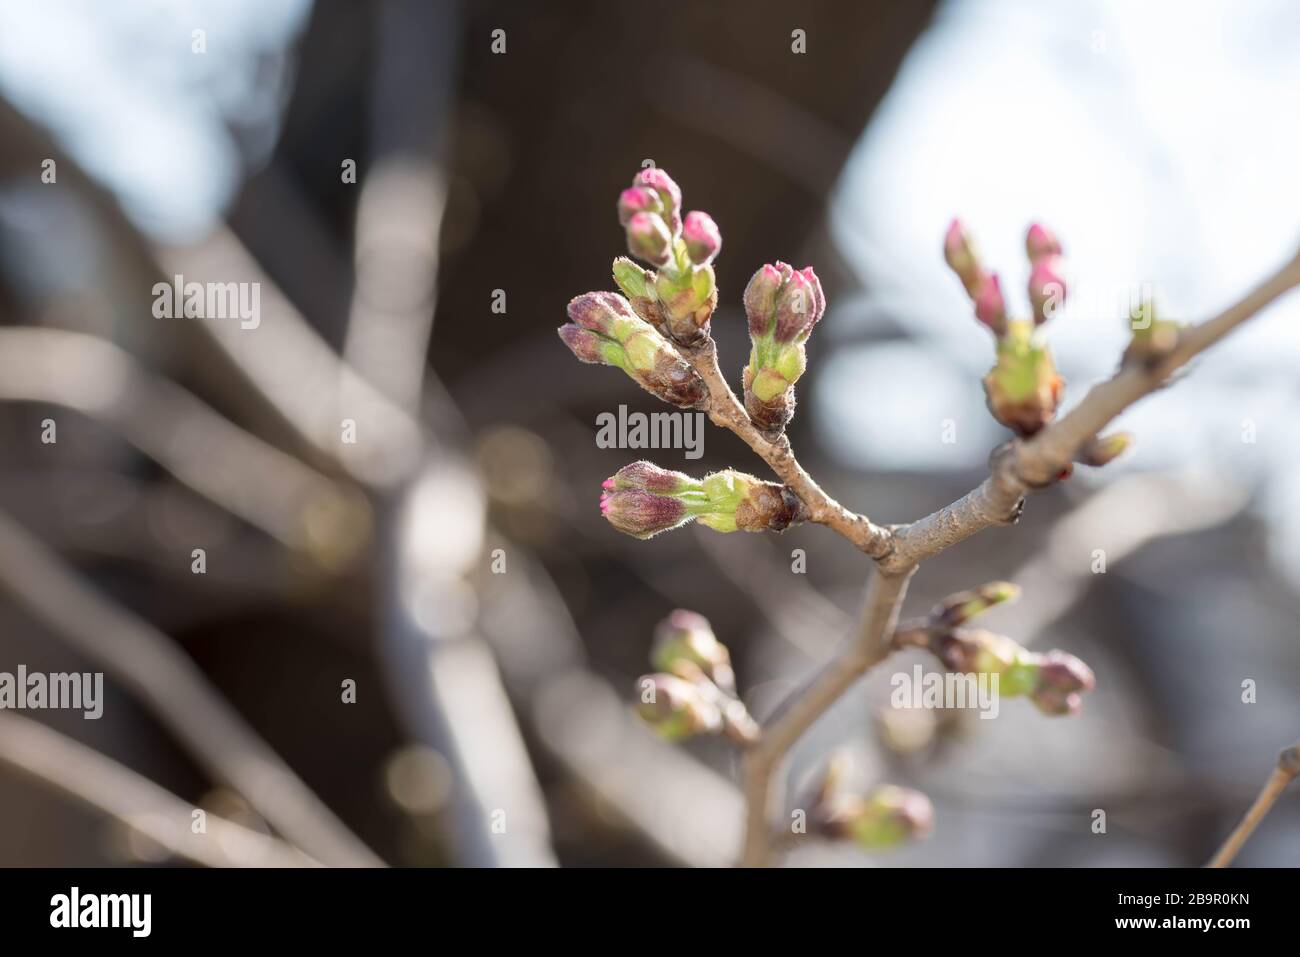 Cherry Blossom Or Sakura Flower Buds About To Bloom In Spring Time Season In Japan Stock Photo Alamy